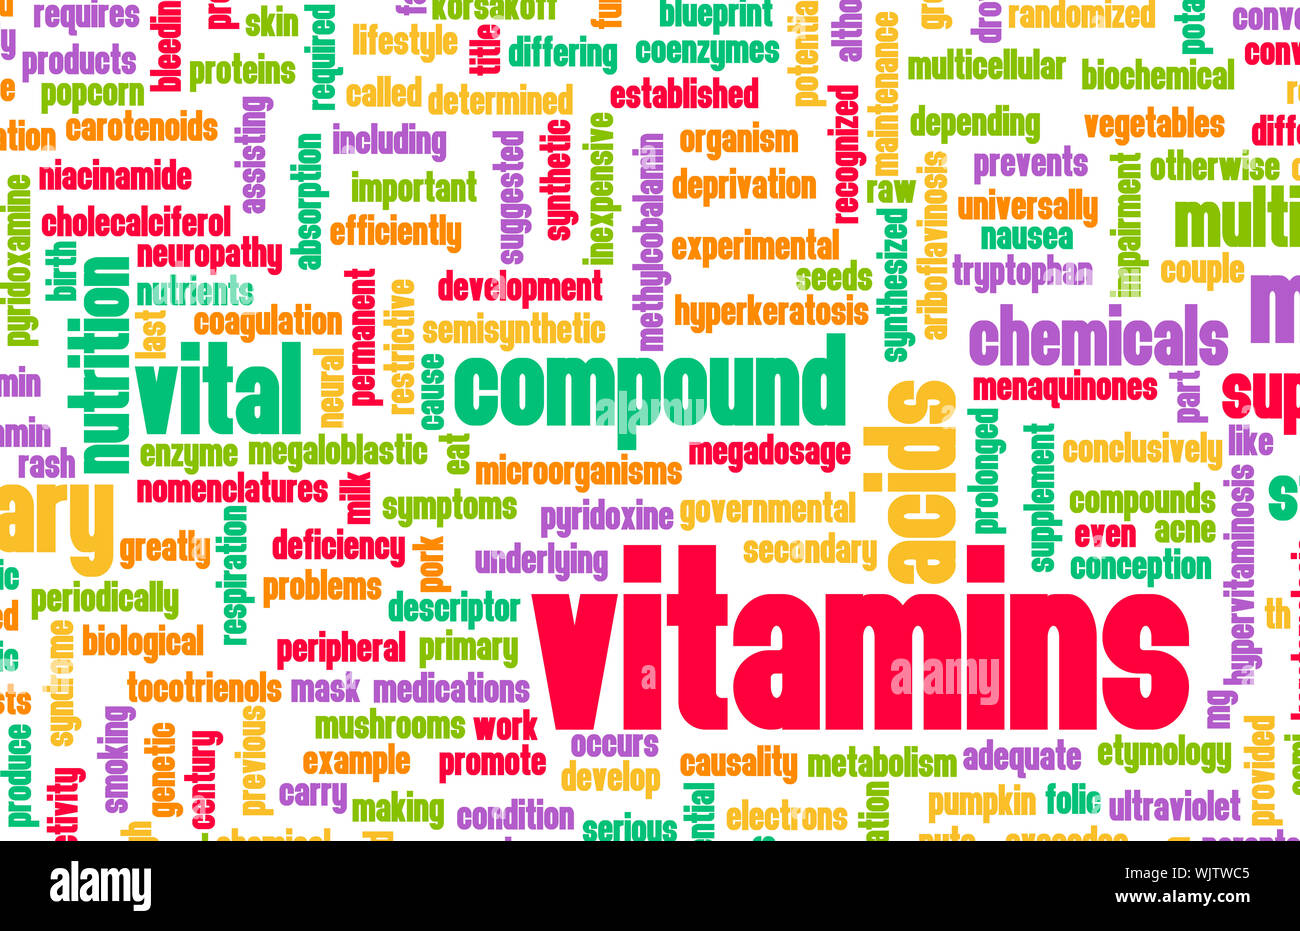 Vitamins and Health Supplements for Healthy Lifestyle Stock Photo